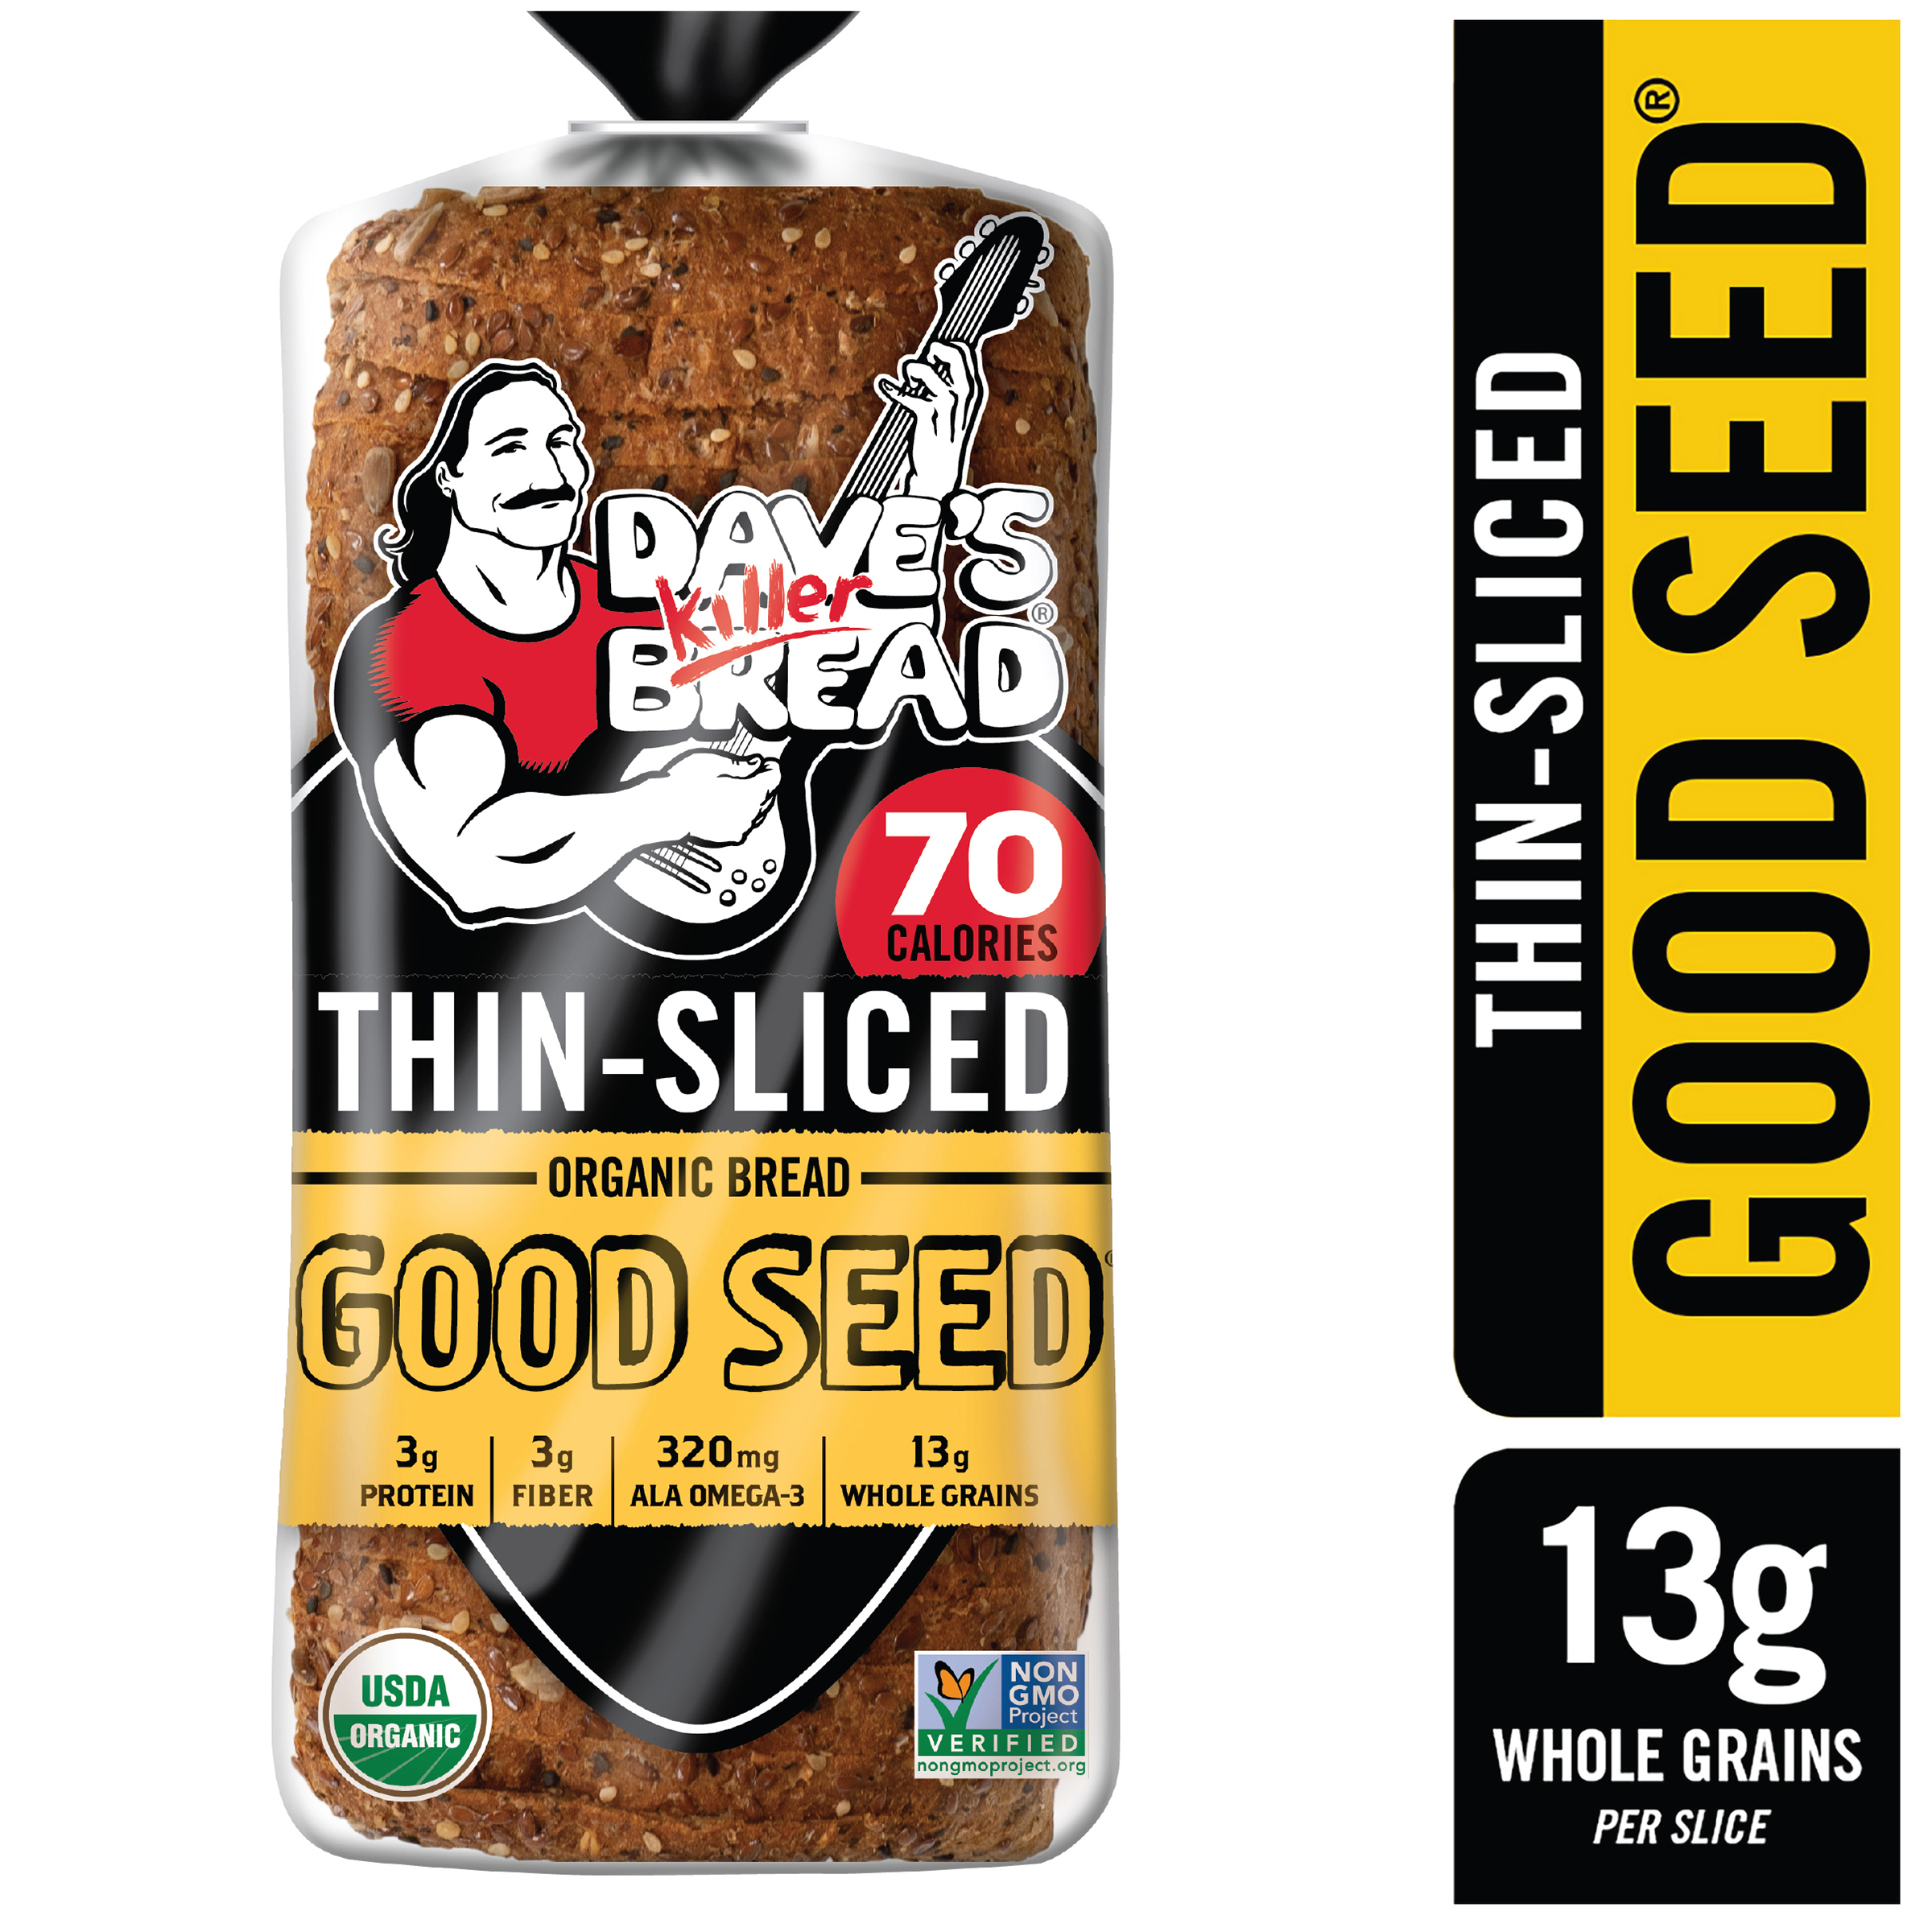 Dave's Killer Bread Good Seed Thin-Sliced Organic Bread Loaf, 20.5 oz - image 9 of 17